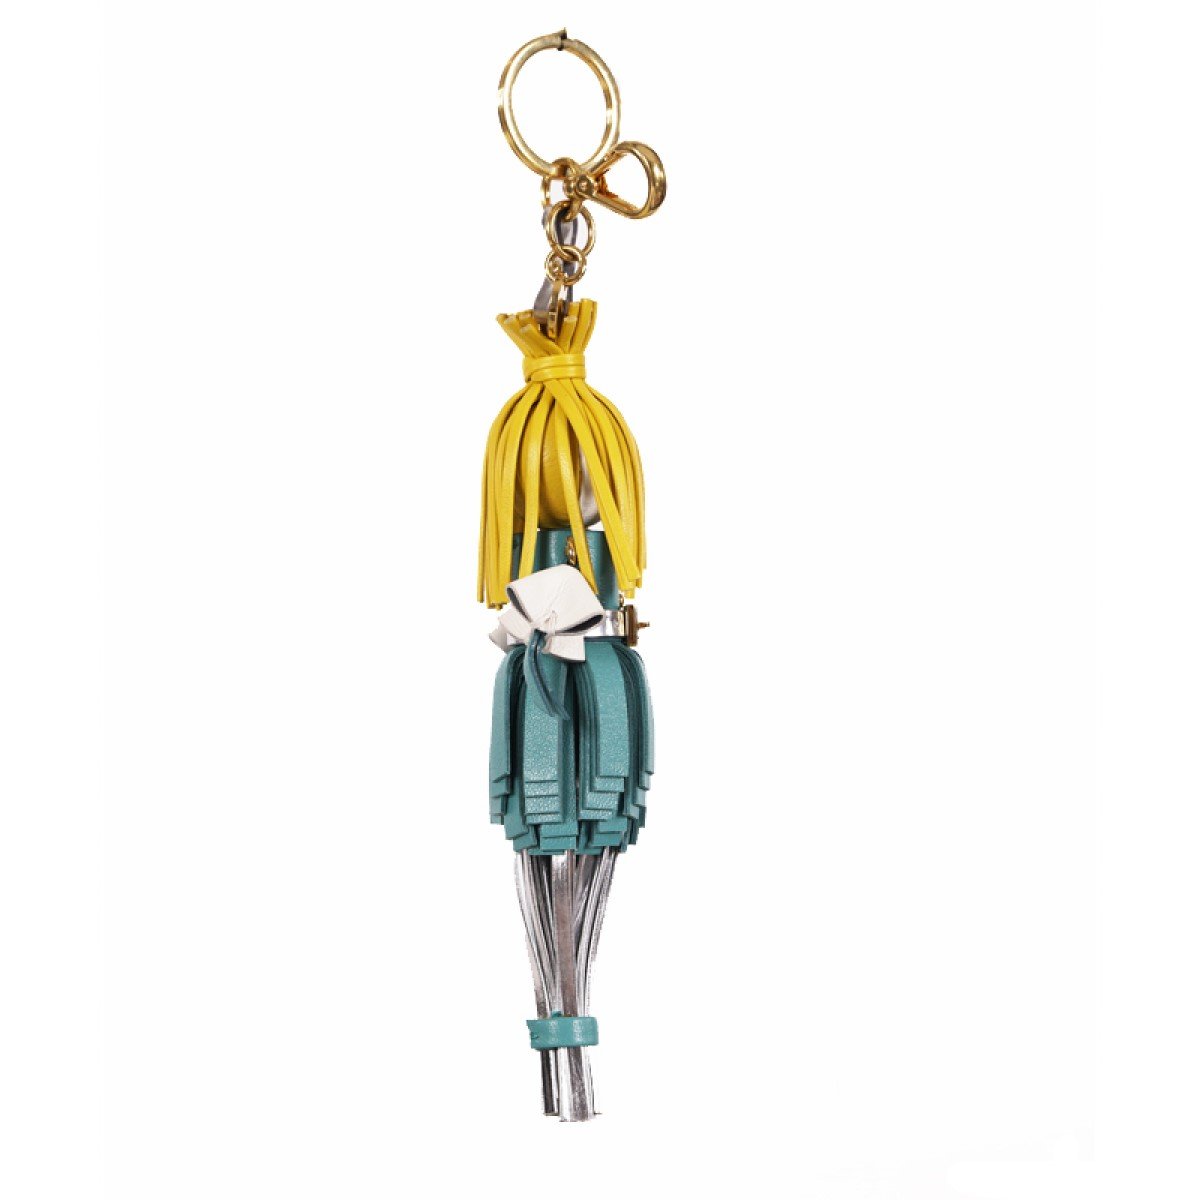 Prada Trick in Pelle Alice Doll Yellow Hair Agata Teal Silver Leather Key Chain Charm 1TL172 at_Queen_Bee_of_Beverly_Hills